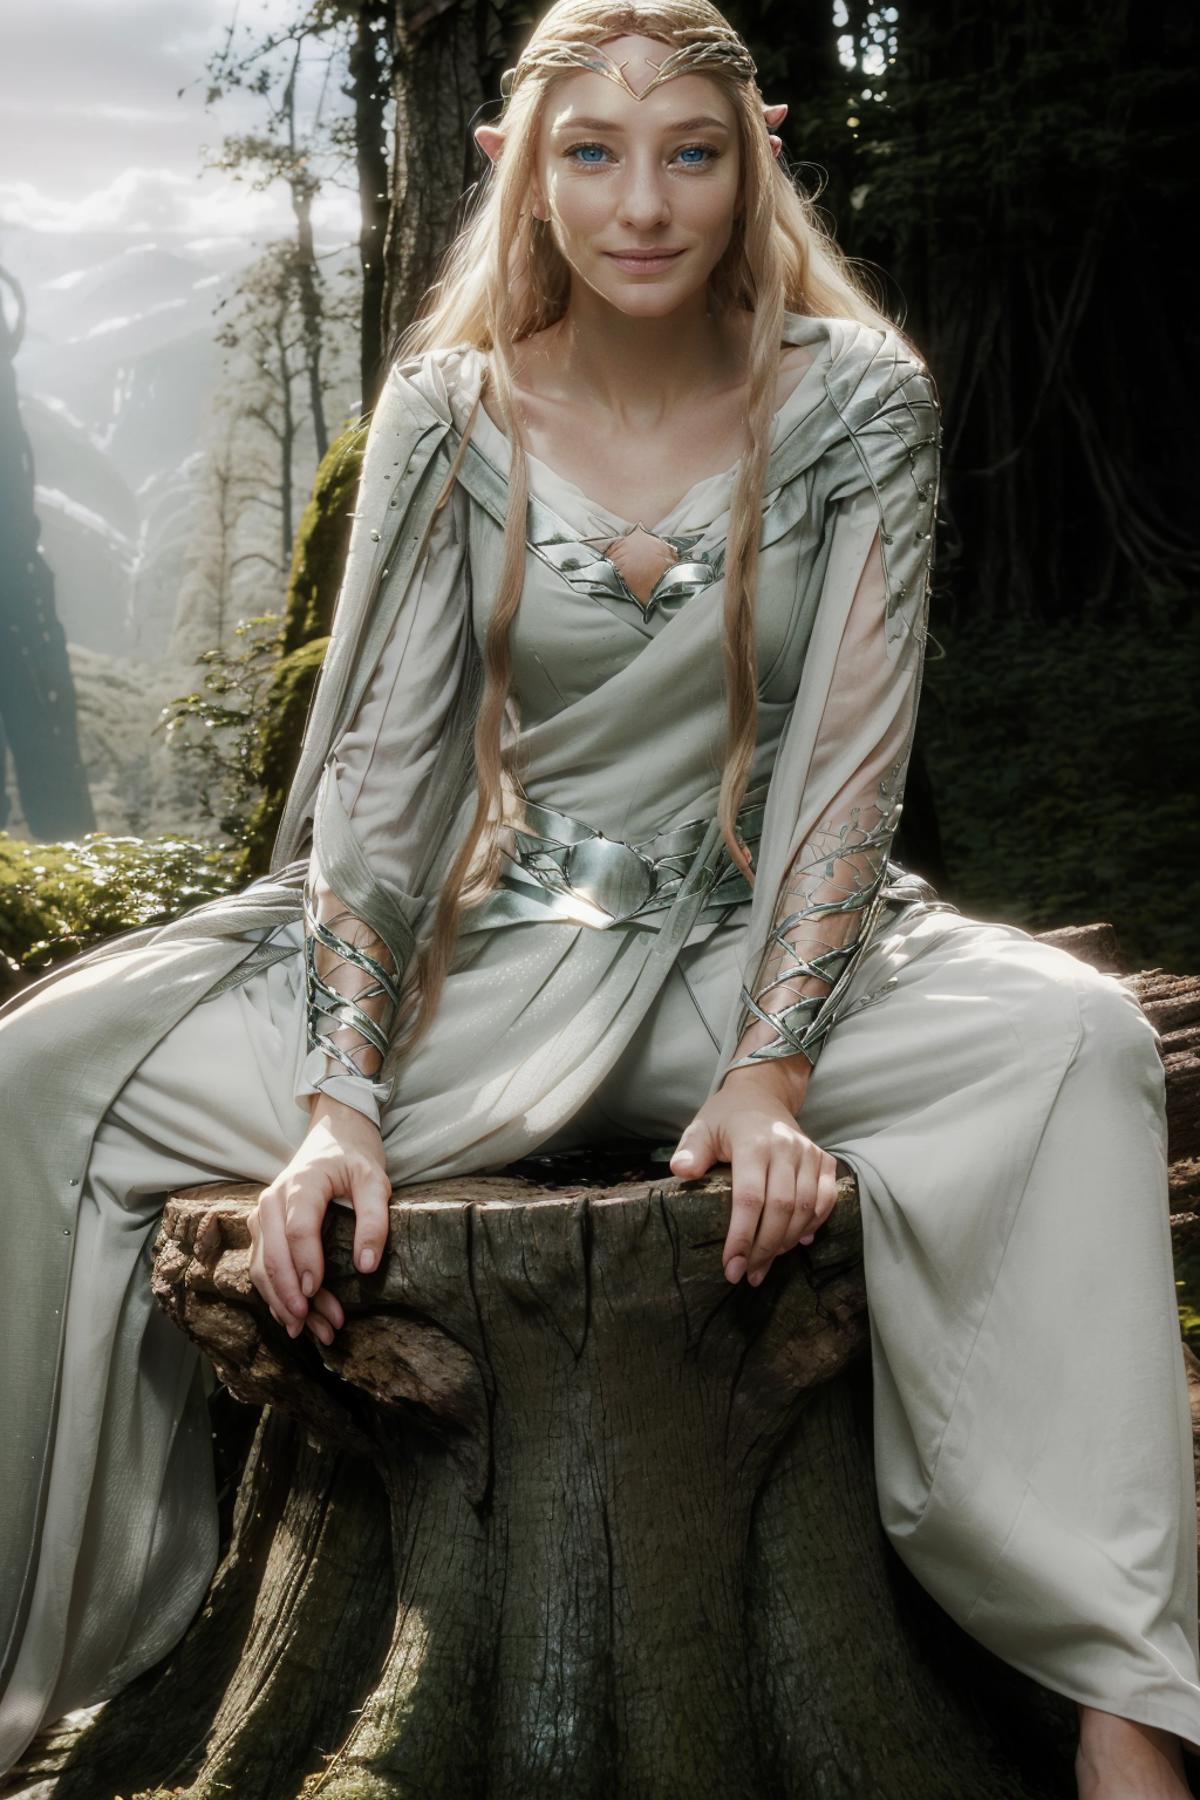 Galadriel - Cate Blanchett - Lord of the Rings image by Lewd_N_Geeky